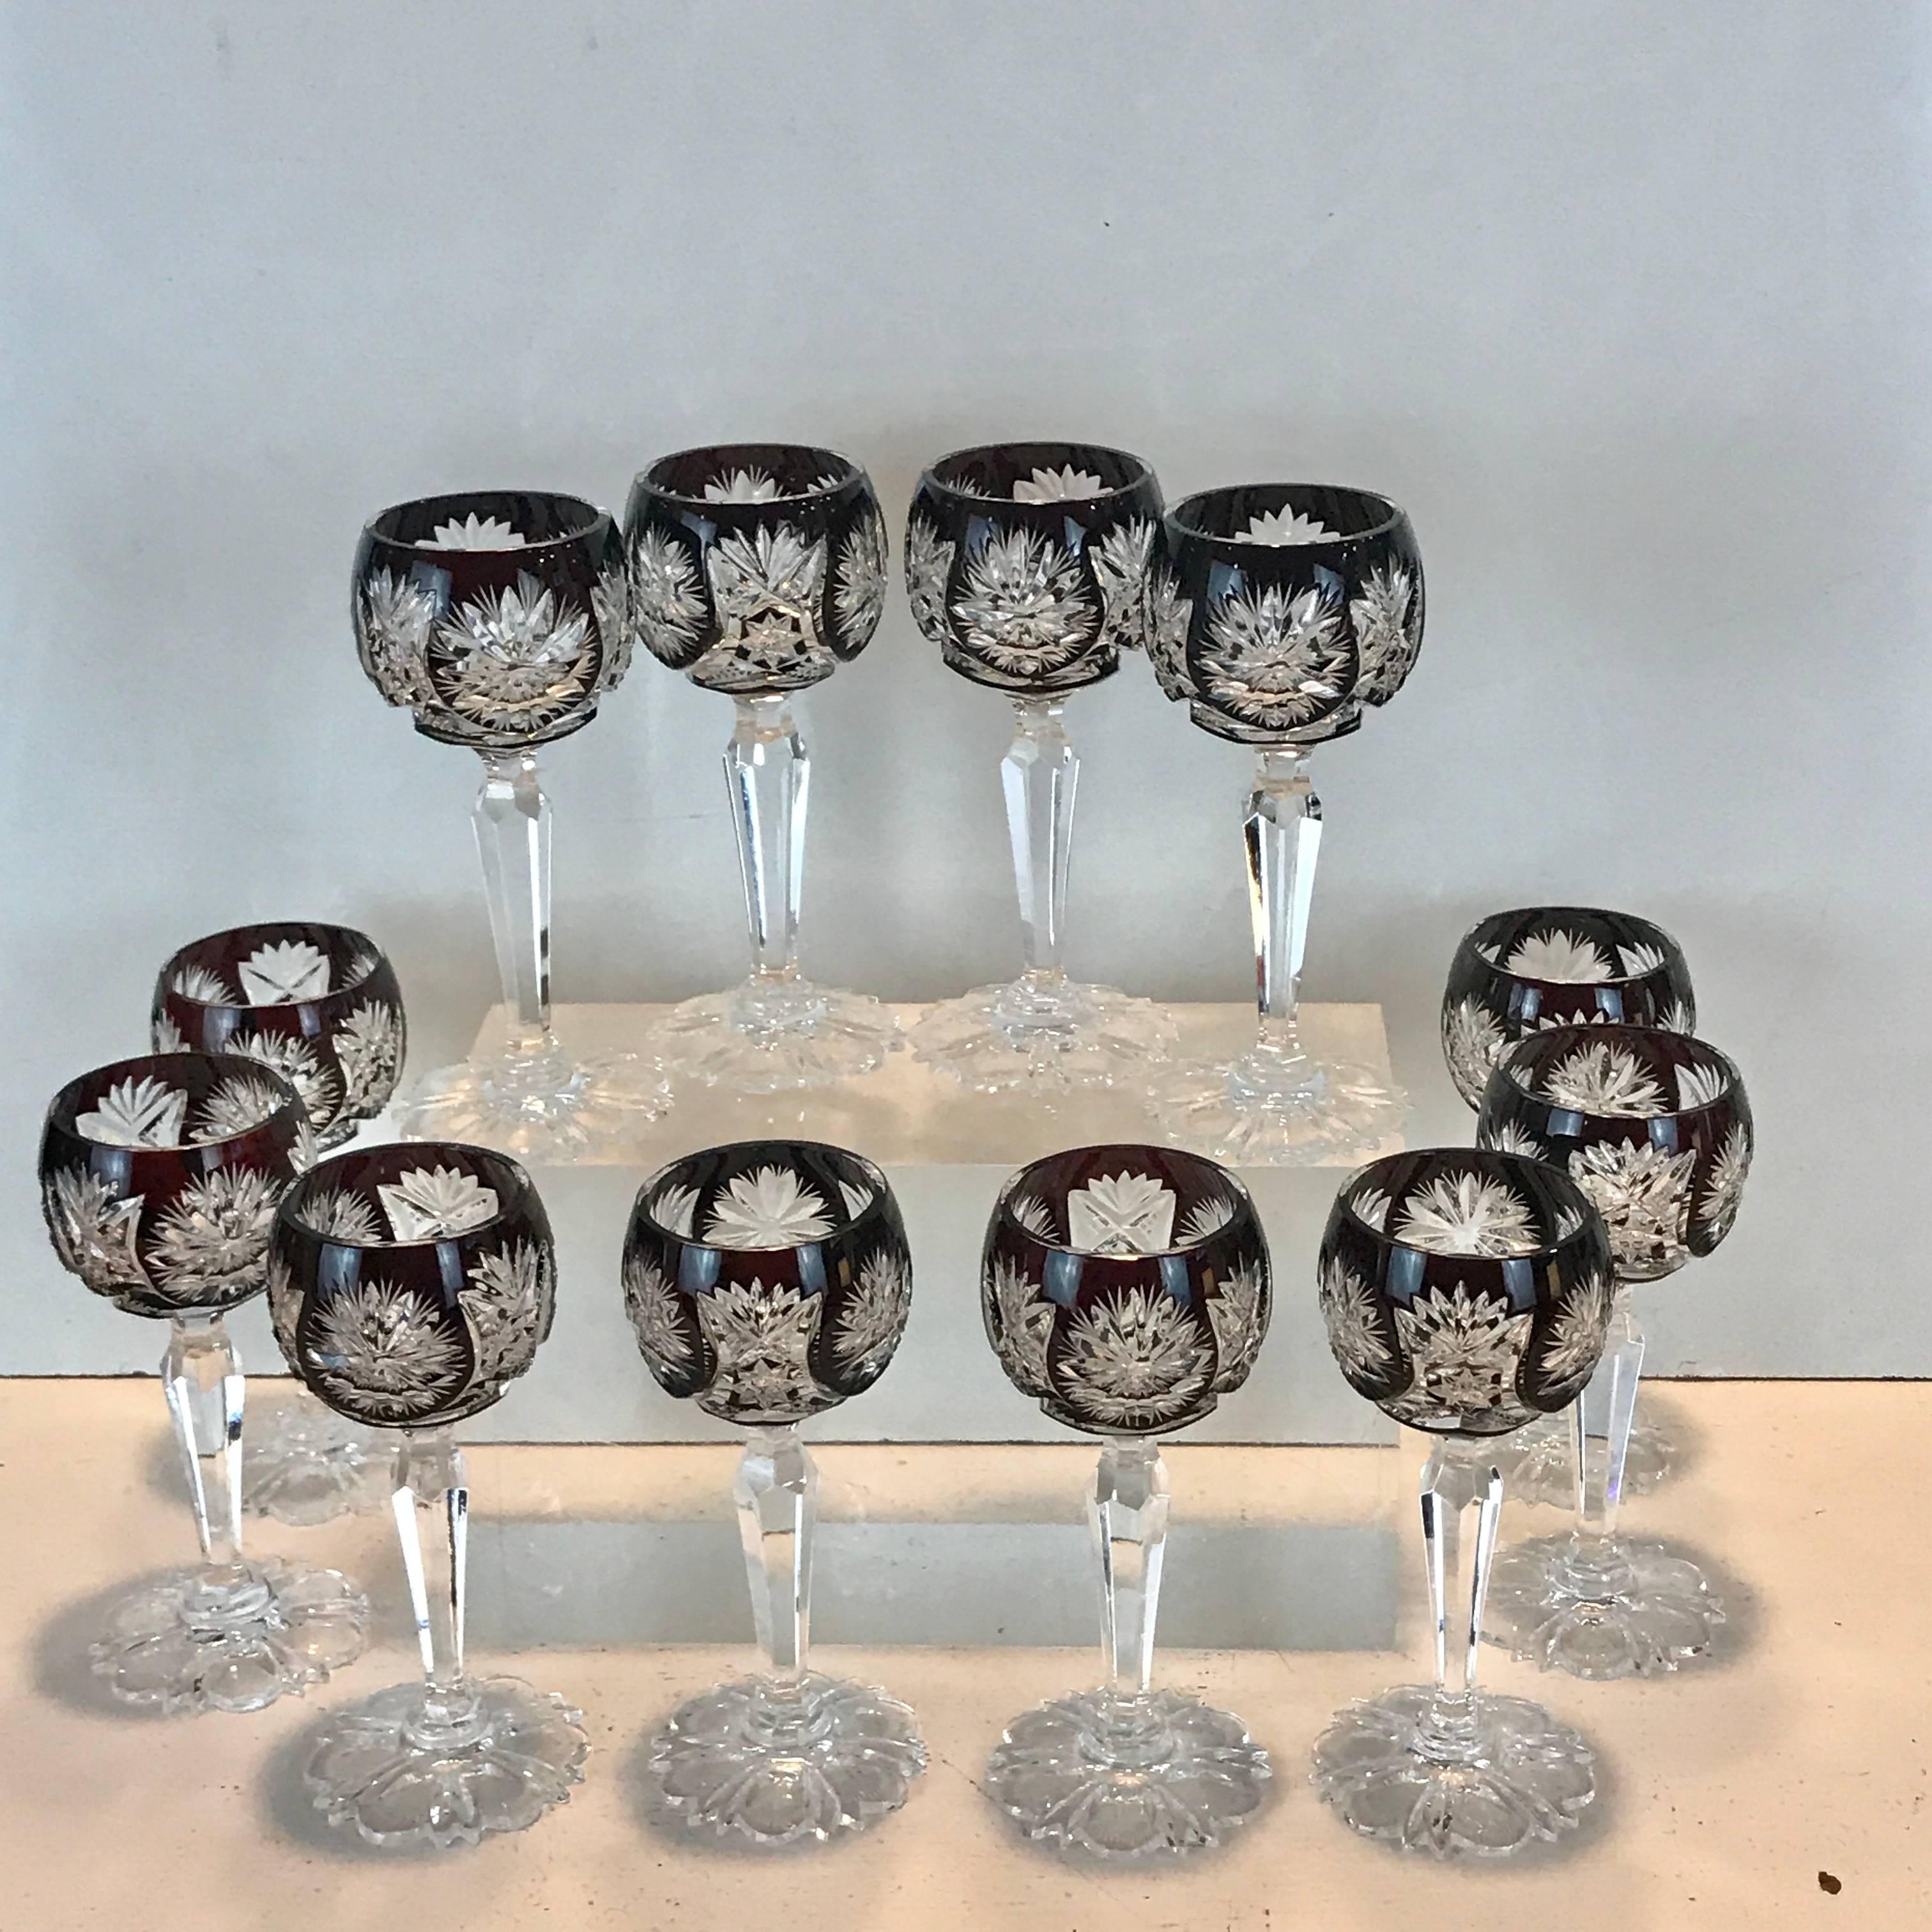 Set of 12 ruby red cut to clear cordials, attributed to St. Louis, Each one with snowflake cut glass panels, with intricate cut six stem petal motif foot (base)
Unsigned
Each glass stands 4.5